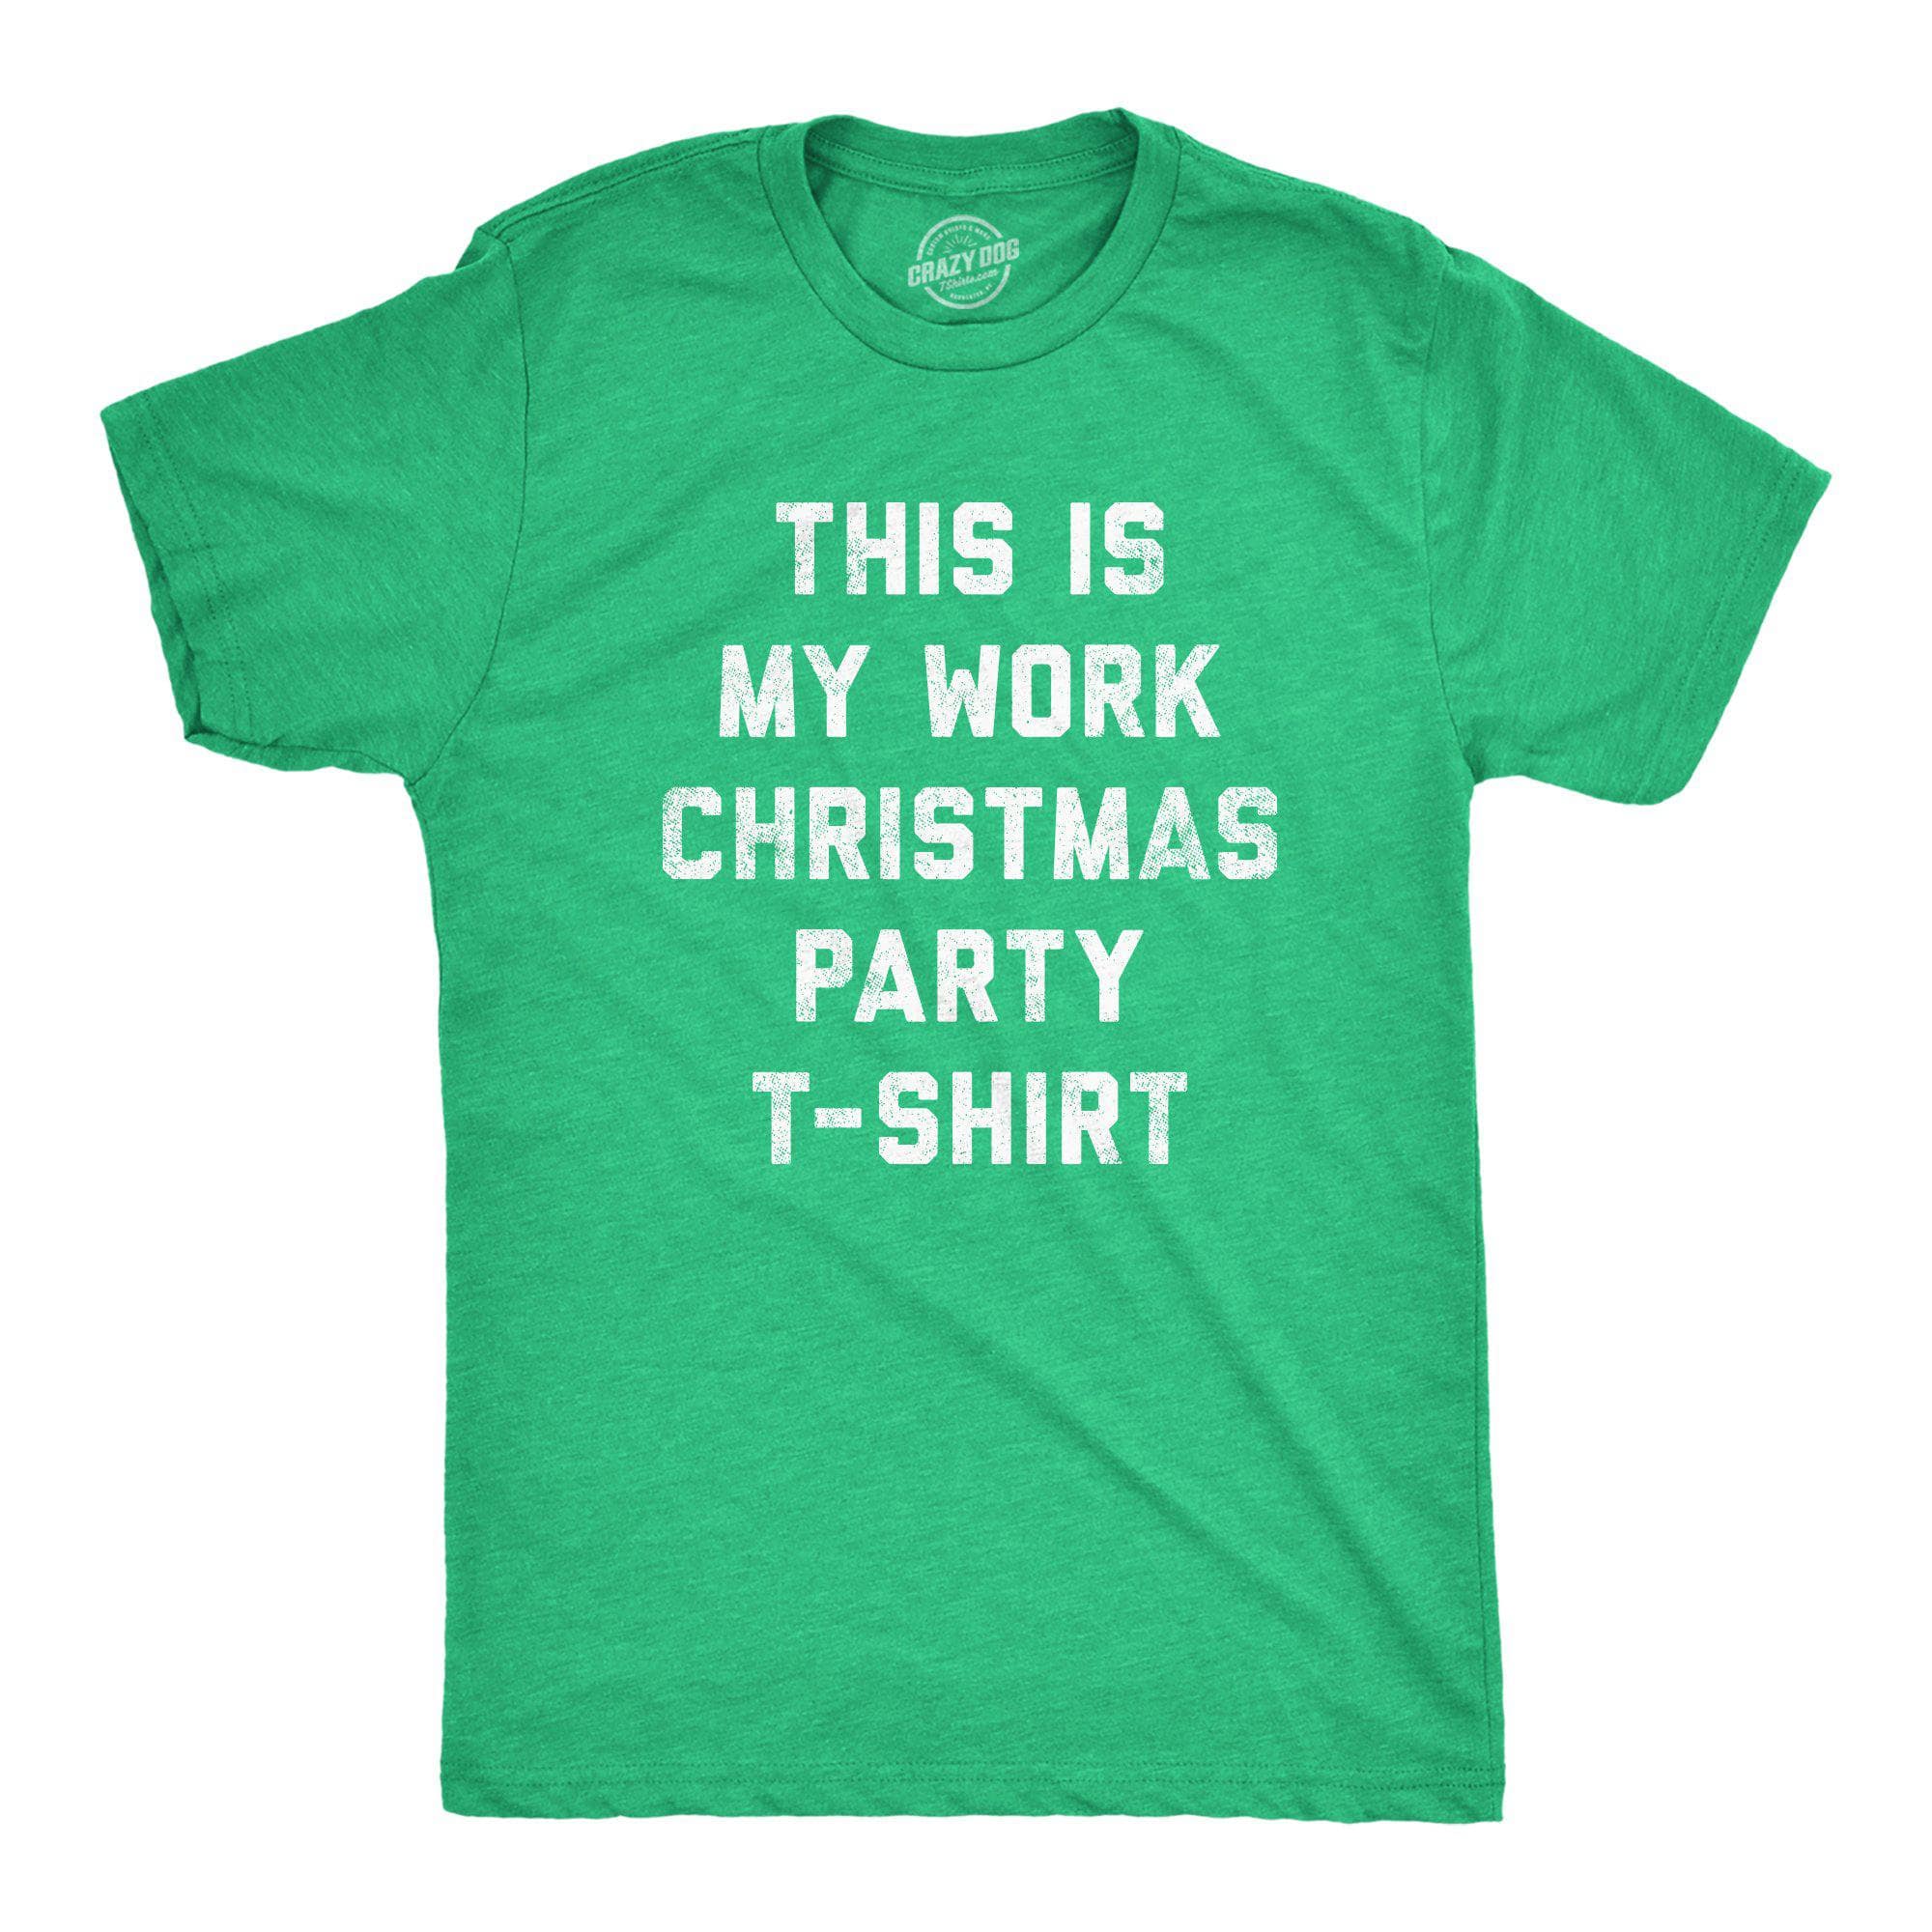 This Is My Work Christmas Party T-Shirt Men's Tshirt - Crazy Dog T-Shirts